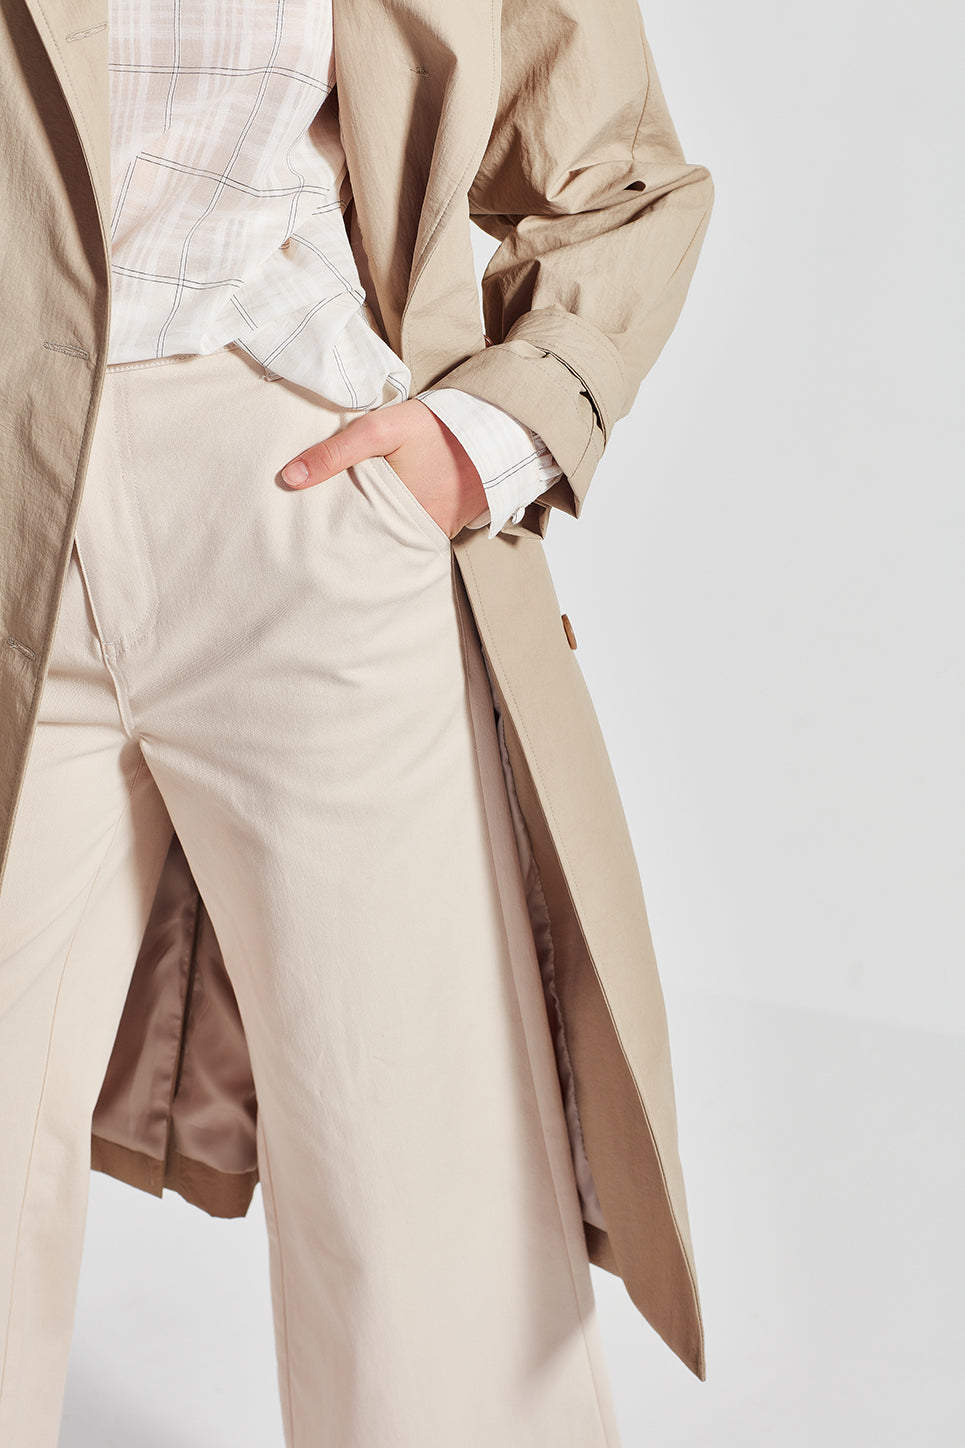 The Dryden Pant in Natural